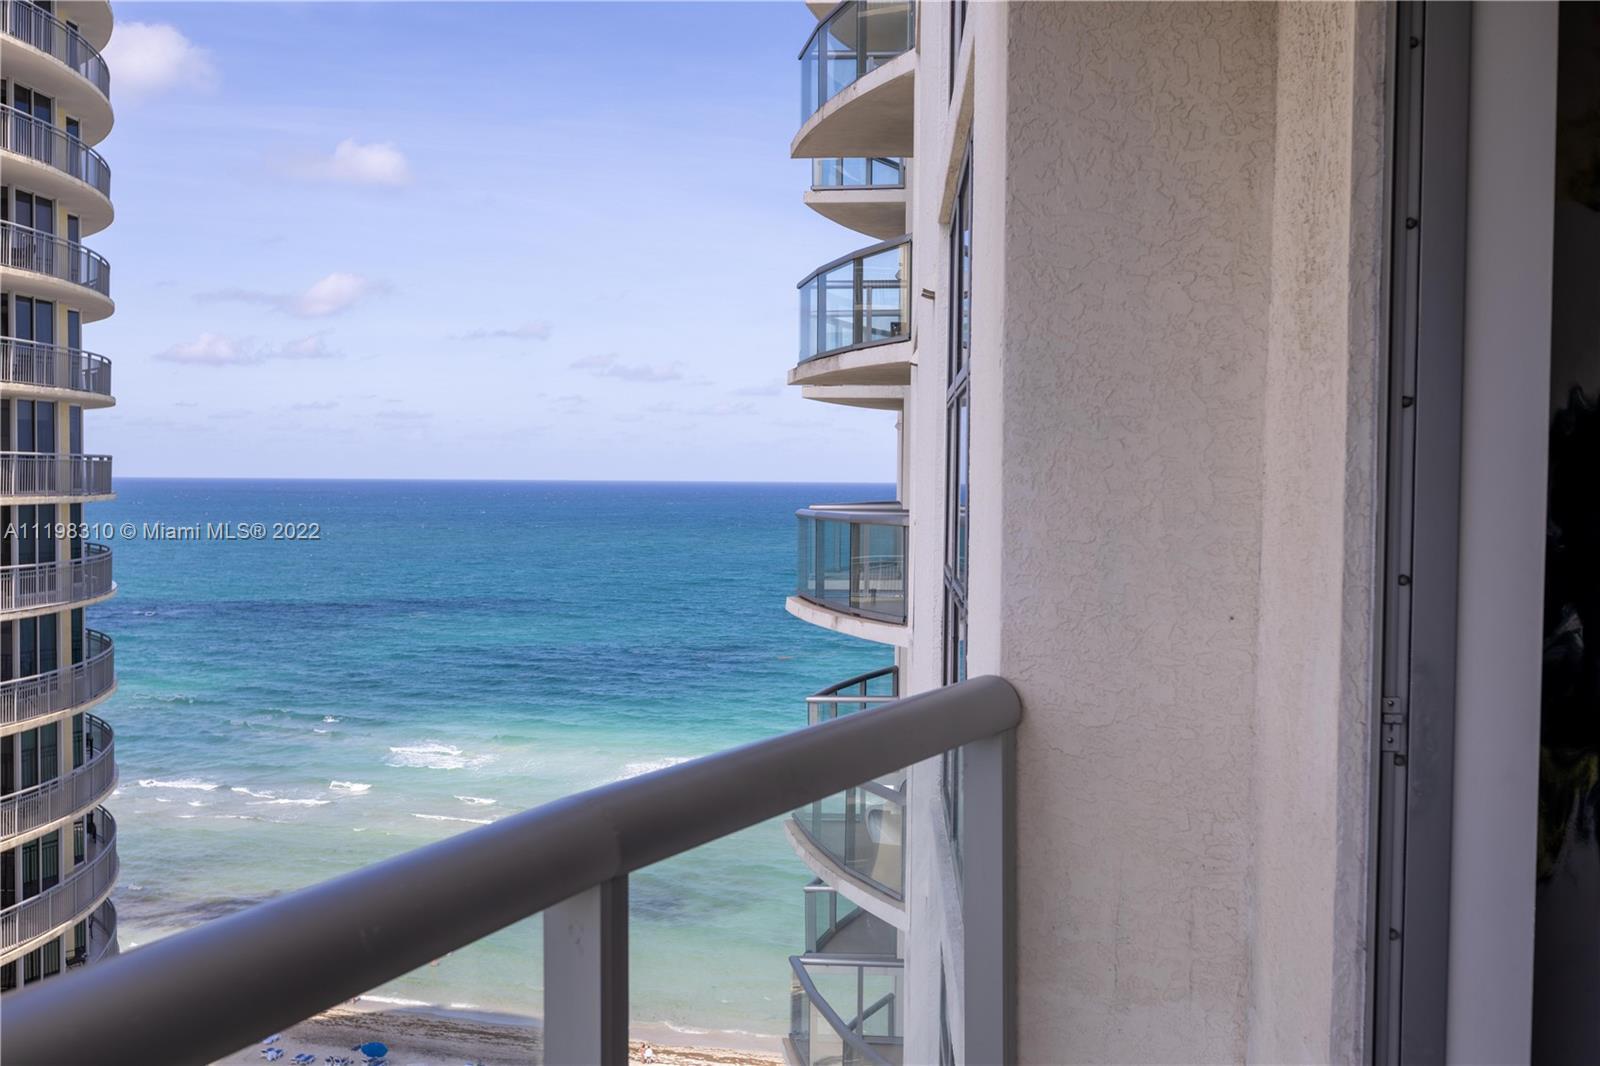 Spectacular condo-hotel located in the heart of Sunny Isles. This renovated property features 1 bedr